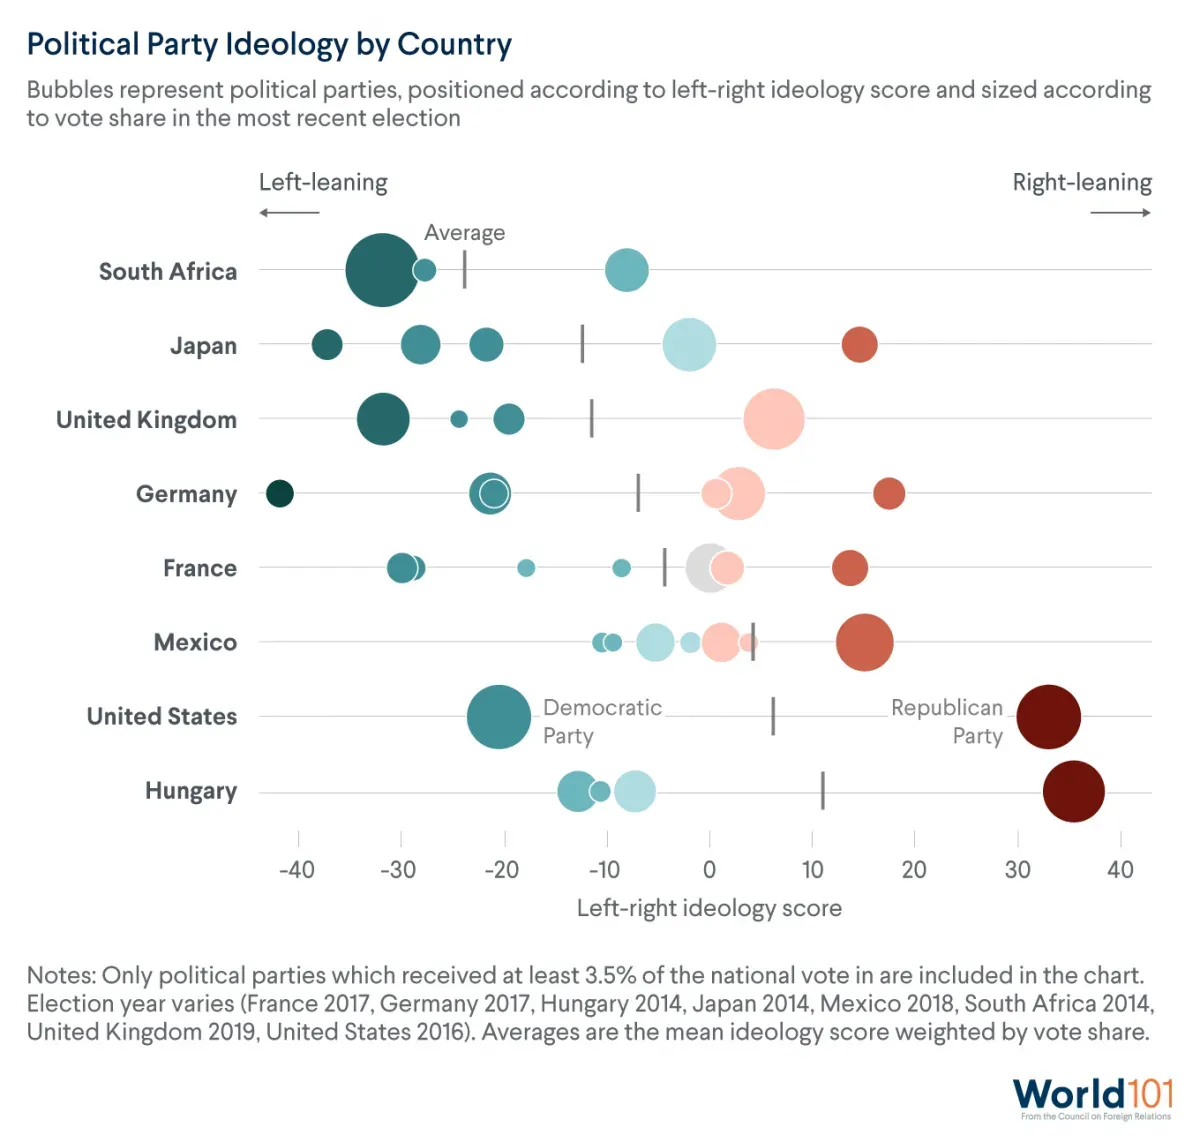 Chart comparing the ideologies of countries political parties on a left/right scale. Of the countries compared, South Africa and Japan have relatively left-leaning parties, while U.S. and Hungary are rightwing. For more info contact us at world101@cfr.org